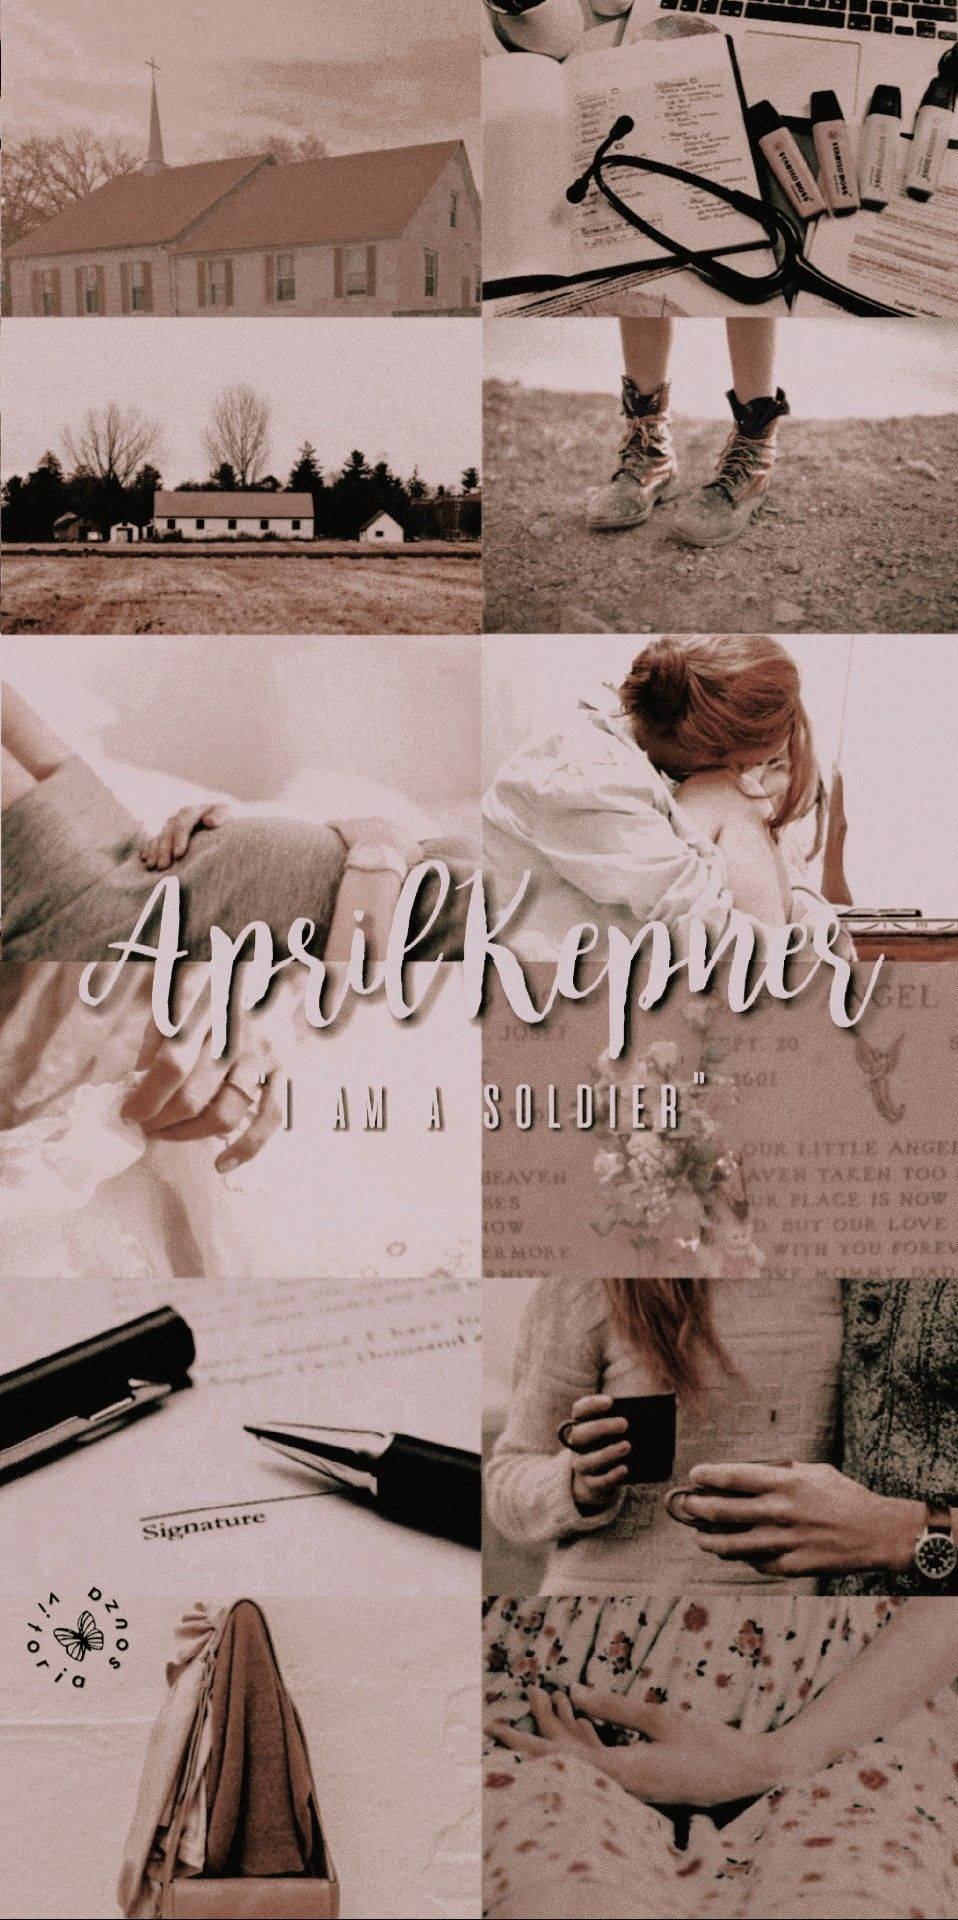 Aesthetic collage of April Kepner from the TV show 